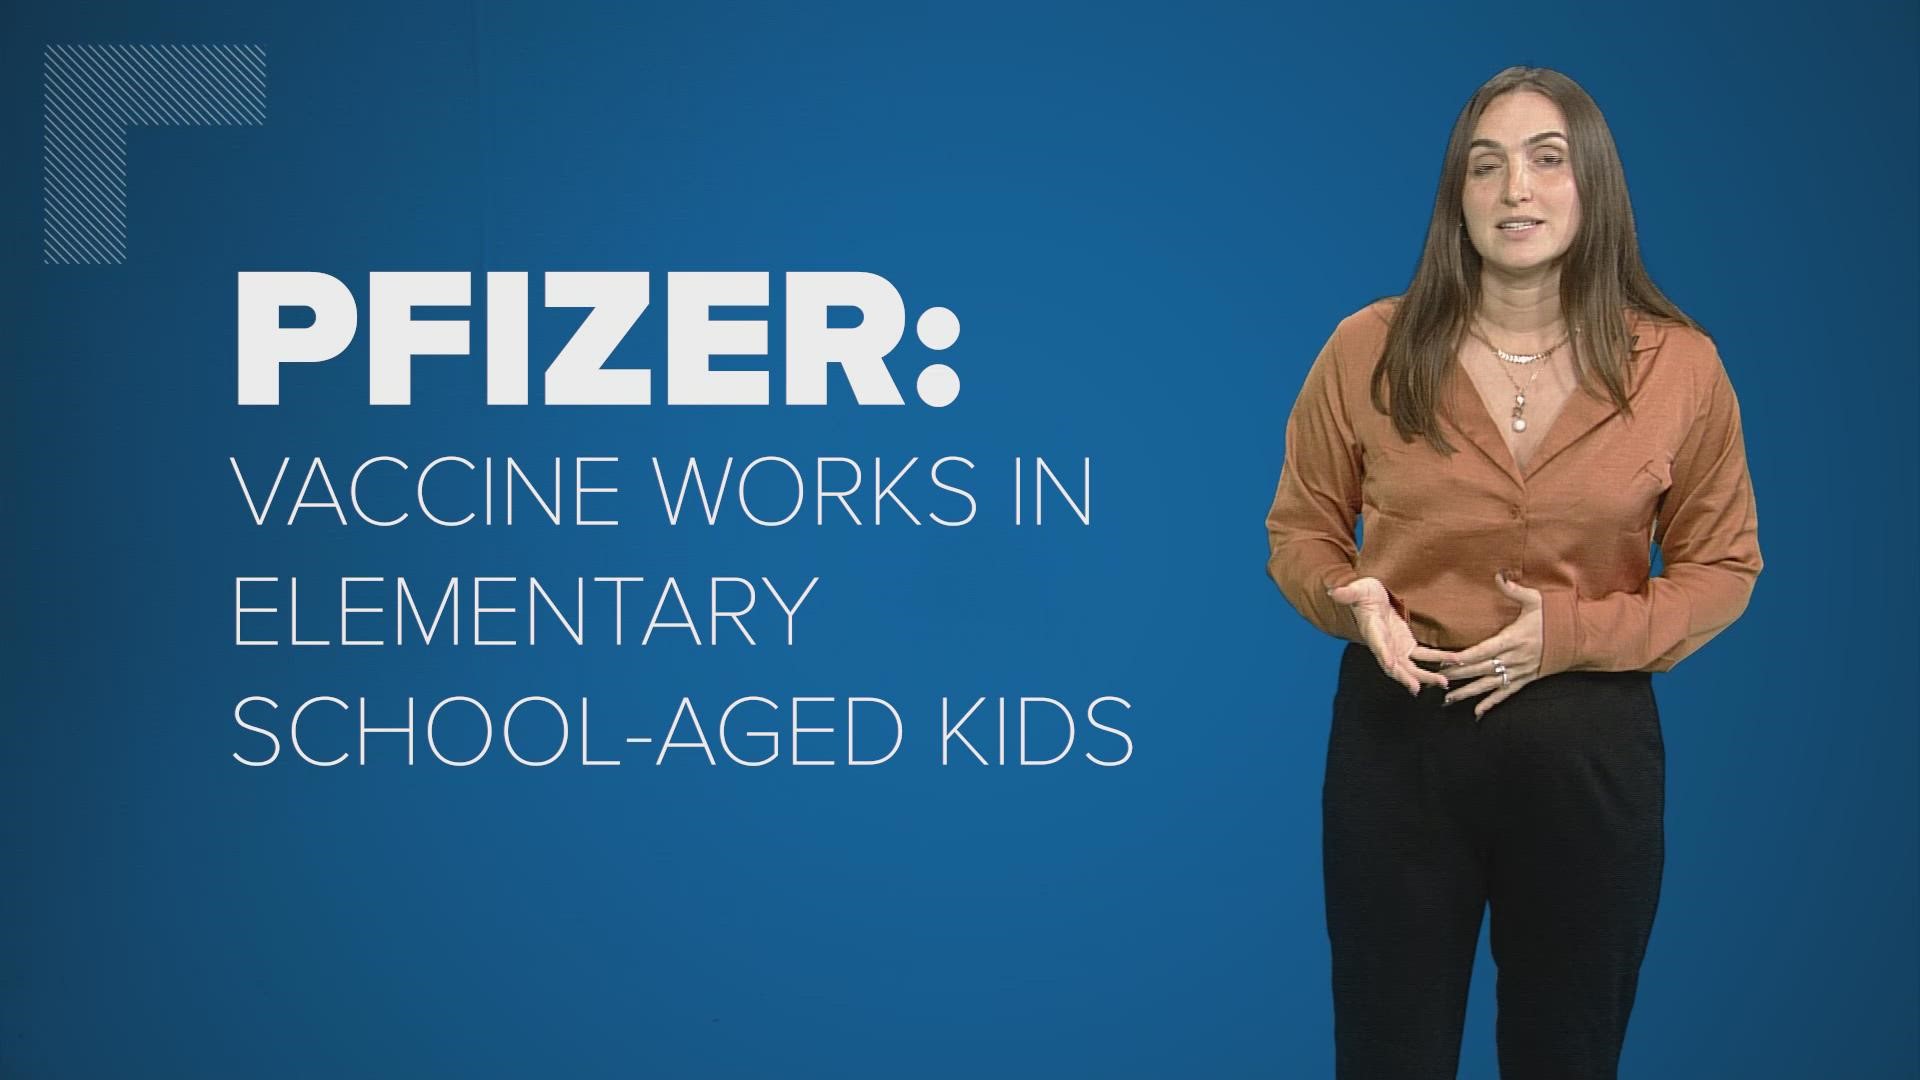 Pfizer said it hopes its vaccine for children under 12 will be ready by Halloween.